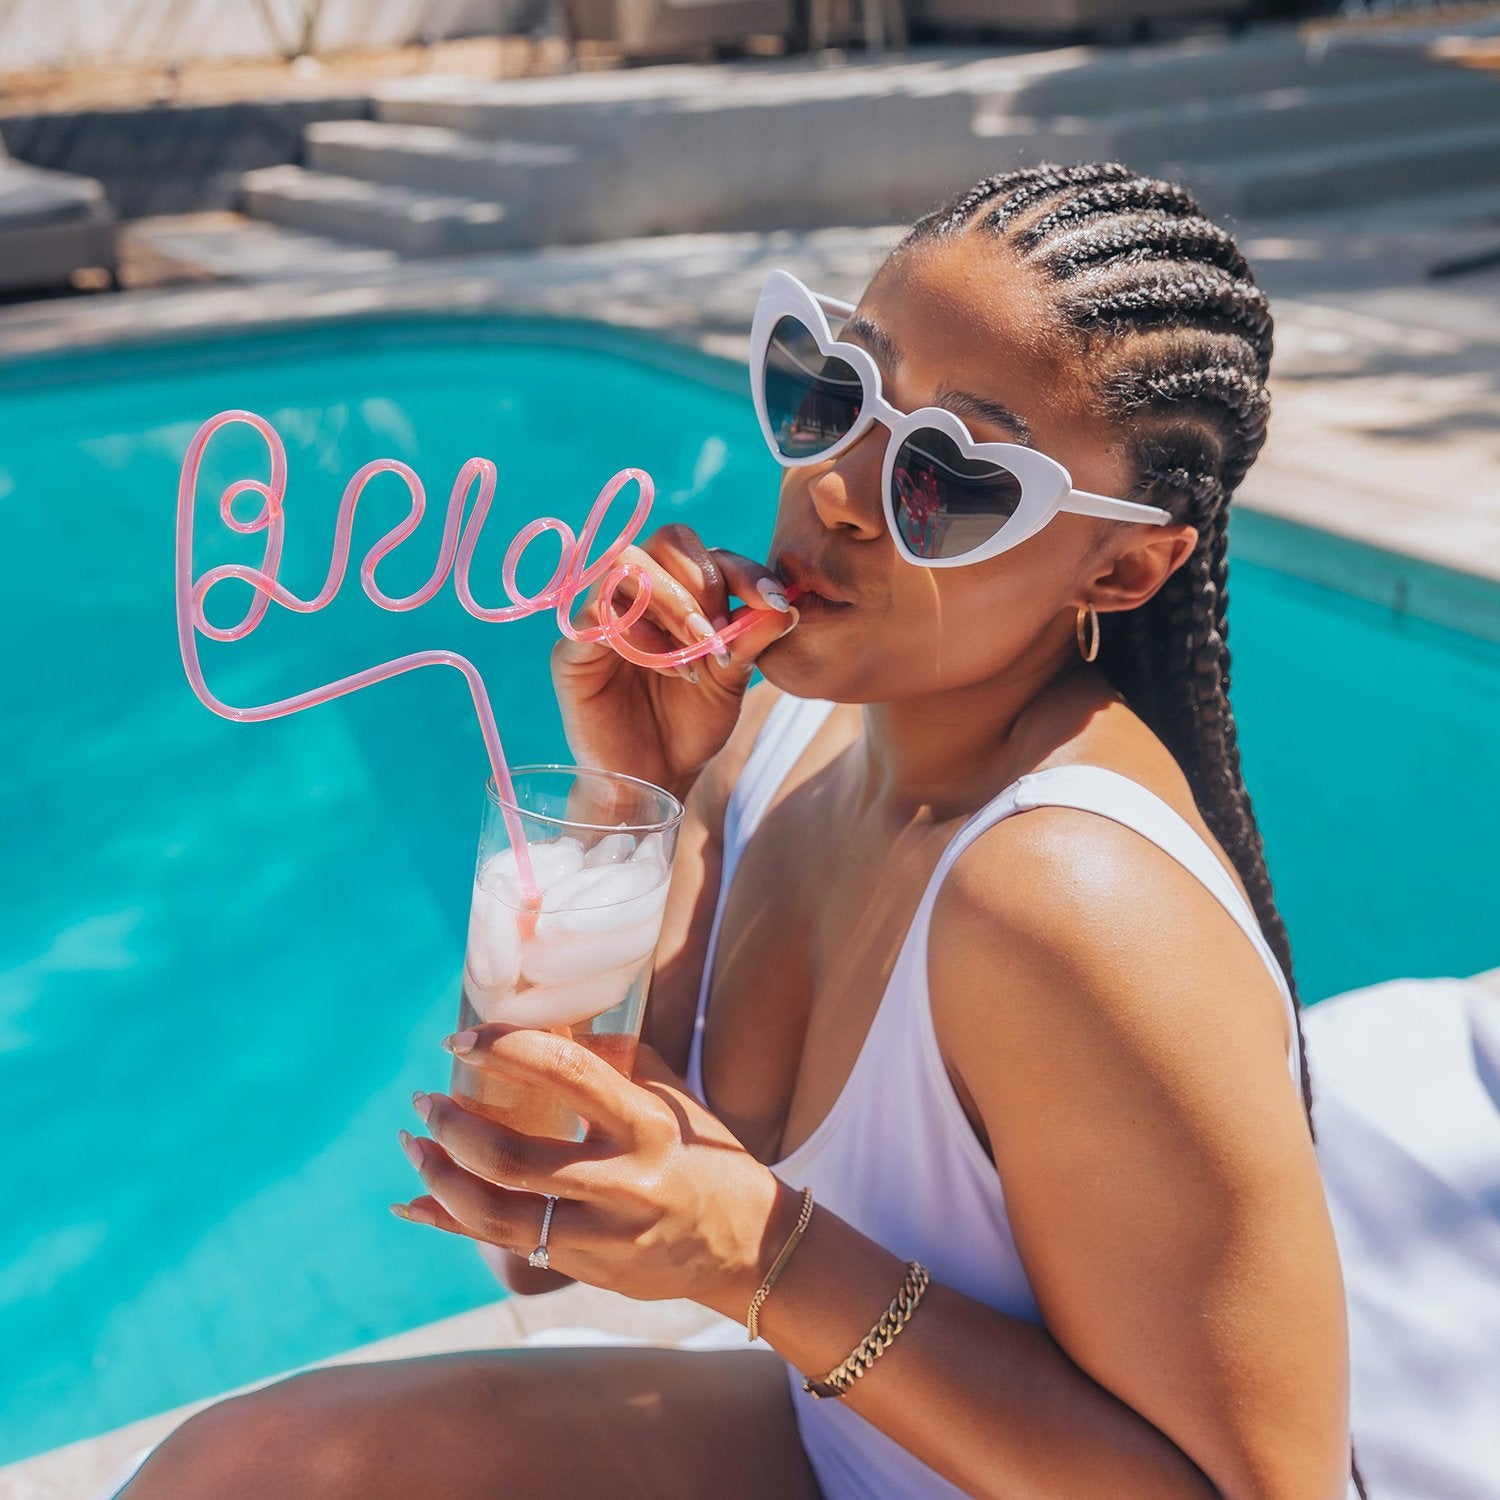 Front view of a slender model with dark skin wearing the Heart Sunglasses in white next to the pool while she sips from a silly straw that is shaped like the word “Bride.”